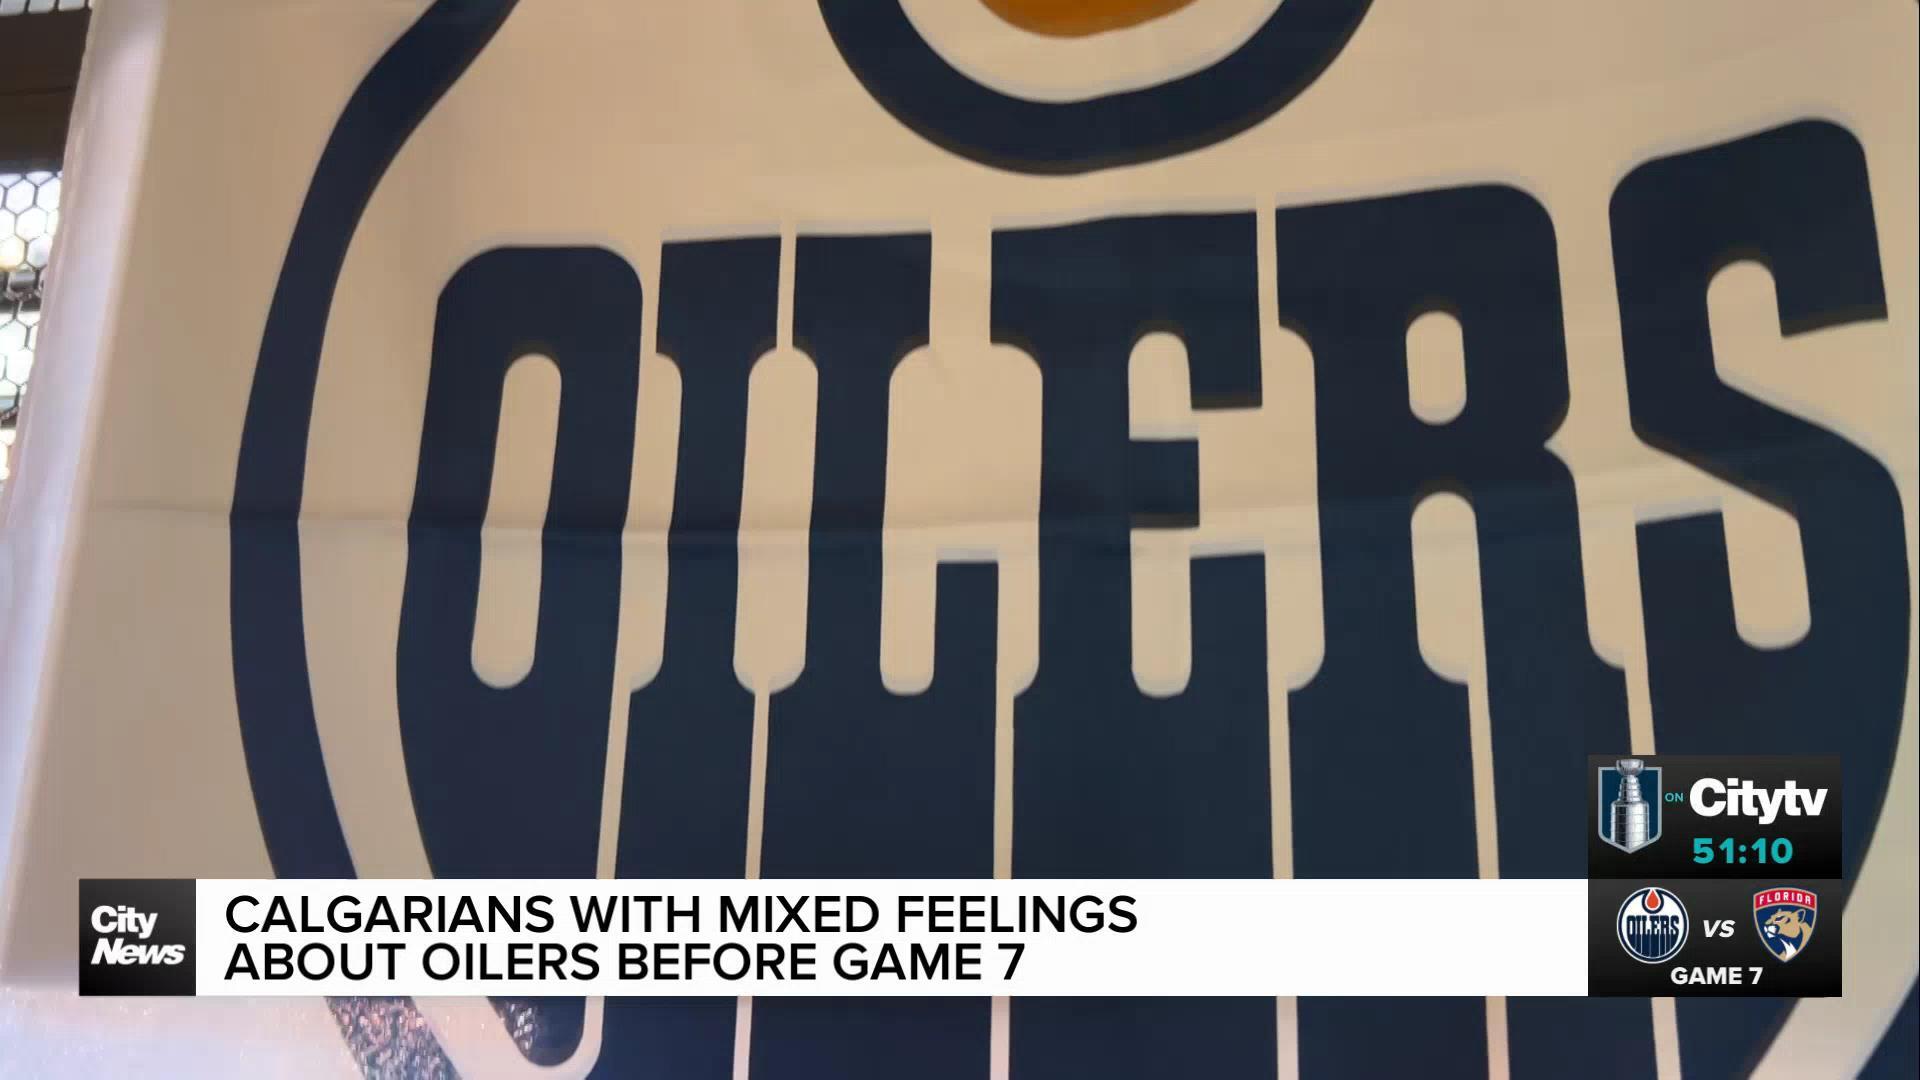 Calgarians with mixed feelings about Oilers in game 7